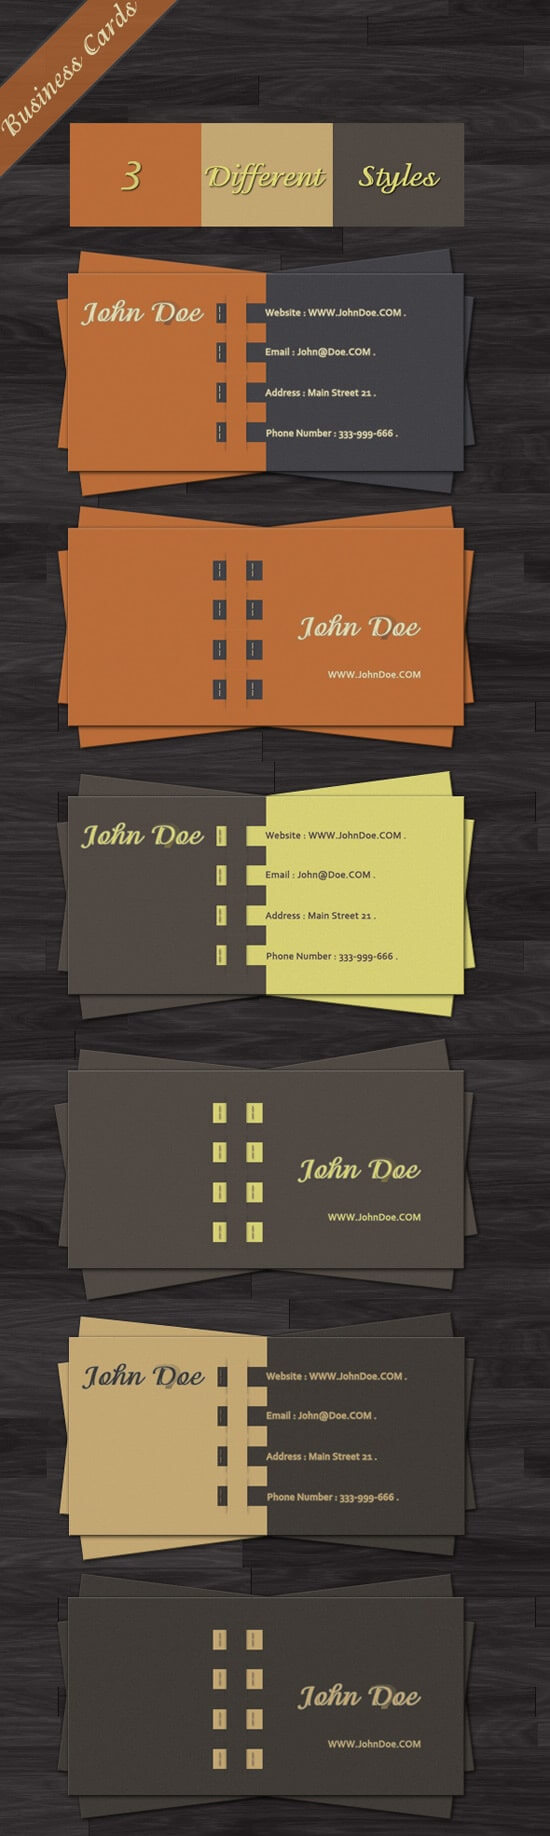 100 Free Business Card Templates – Designrfix Intended For Calling Card Free Template